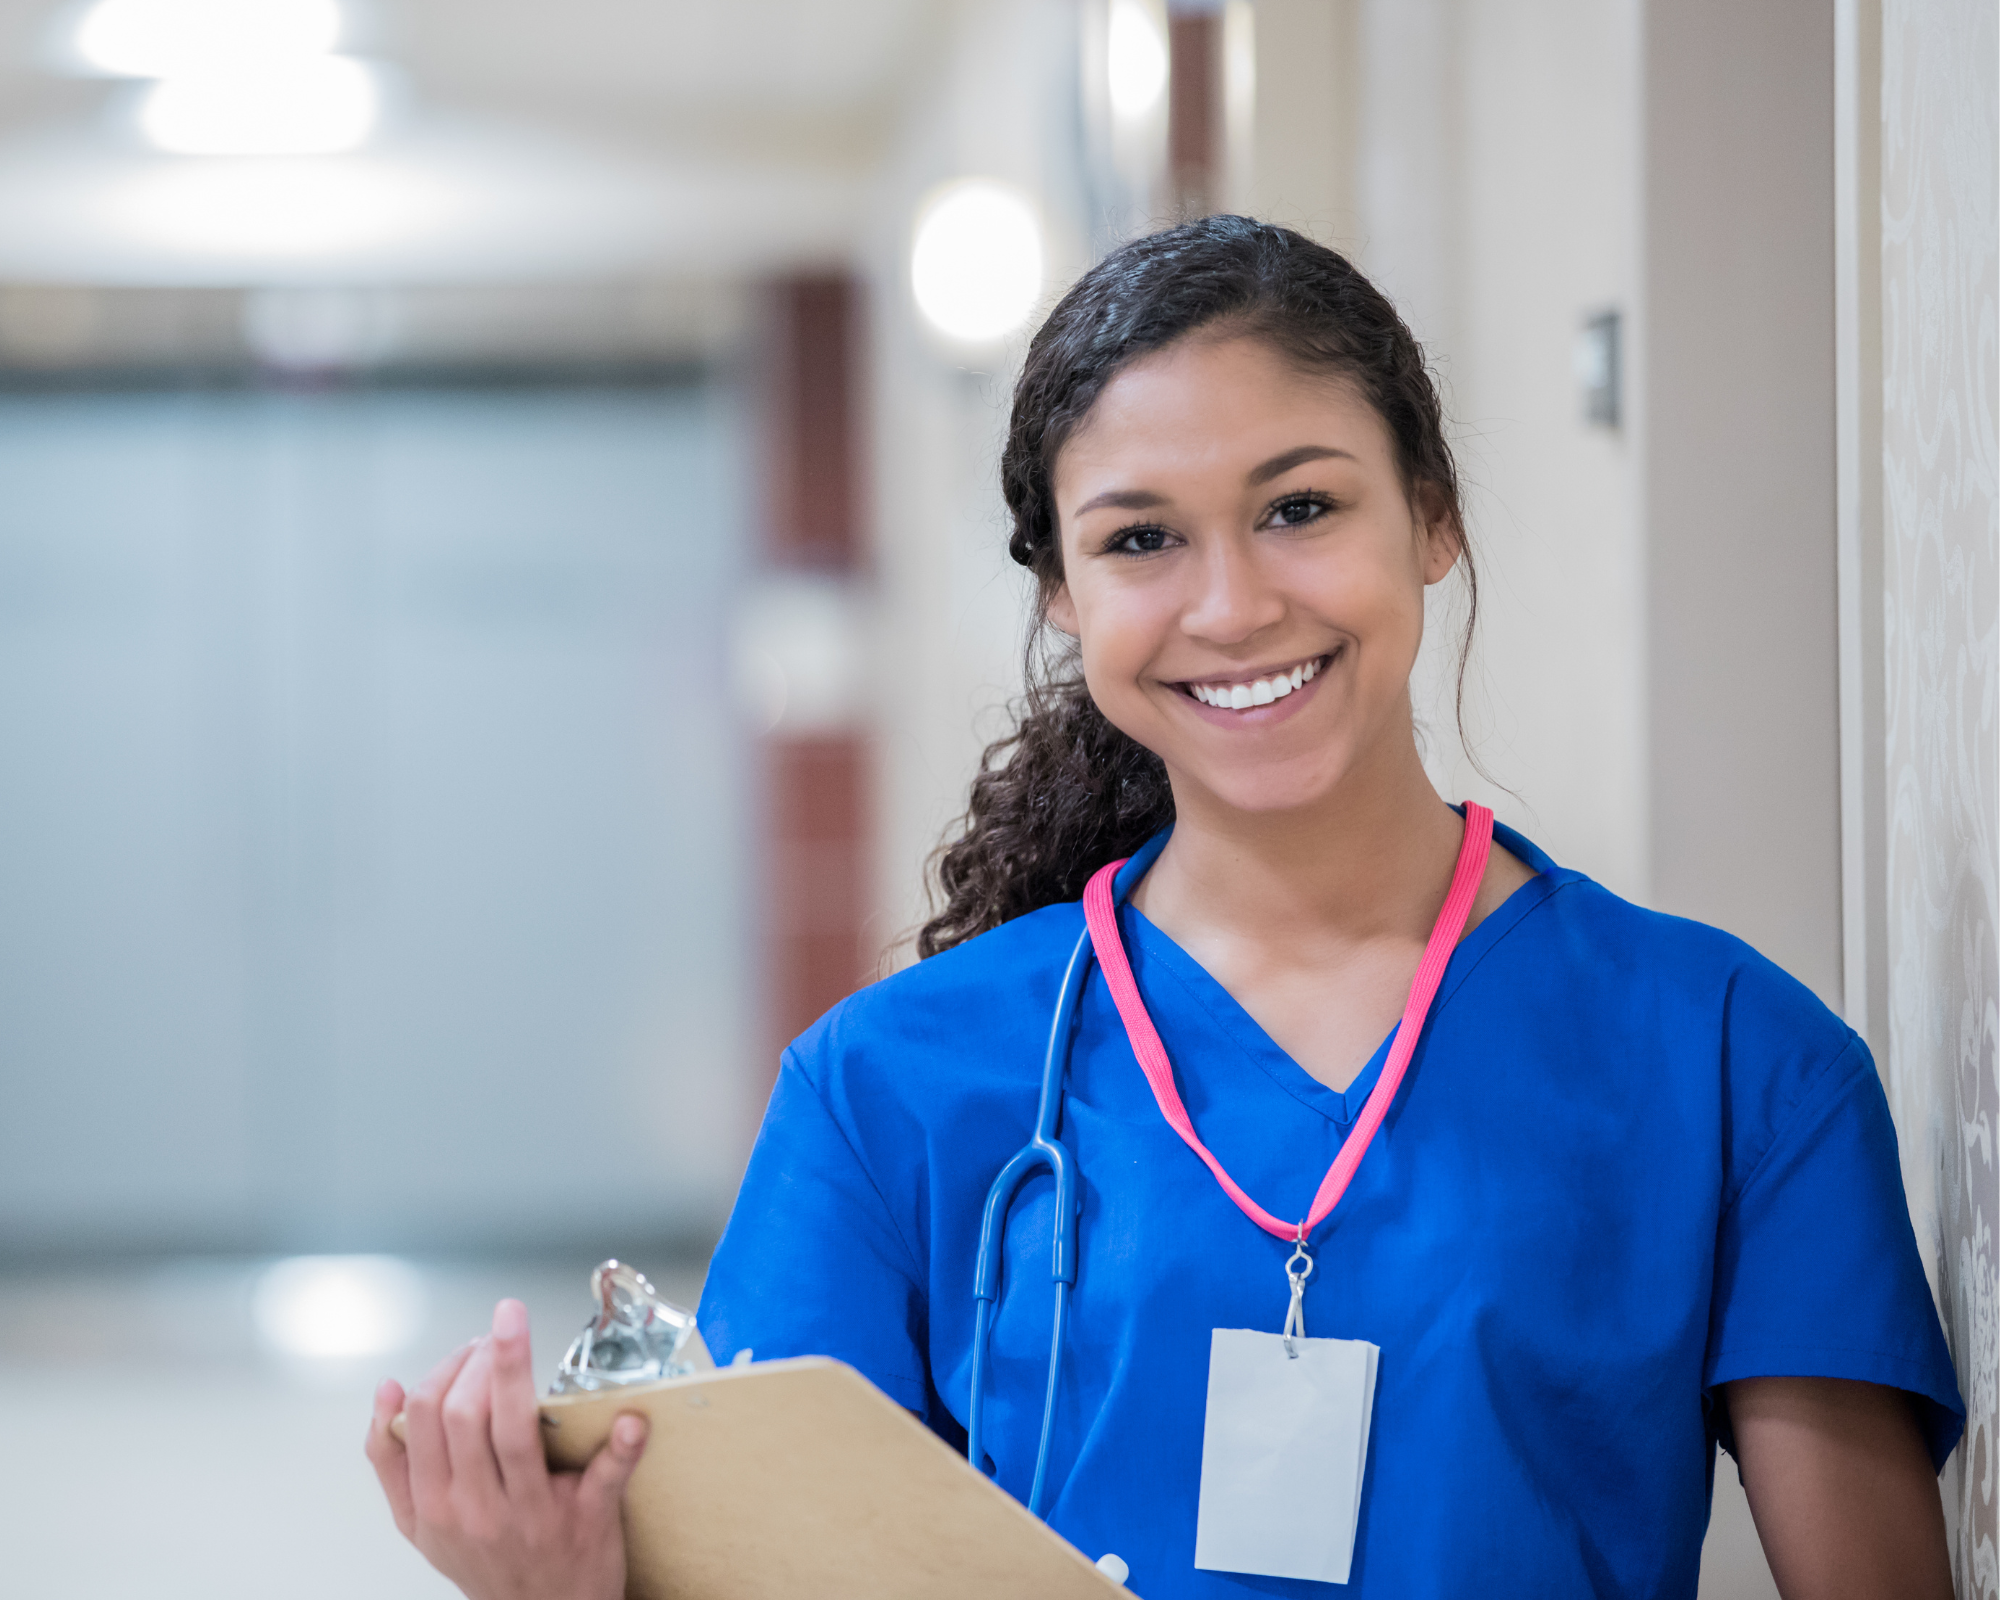 A female nurse wearing blue scrubs and holding a clipboard smiling at the camera.